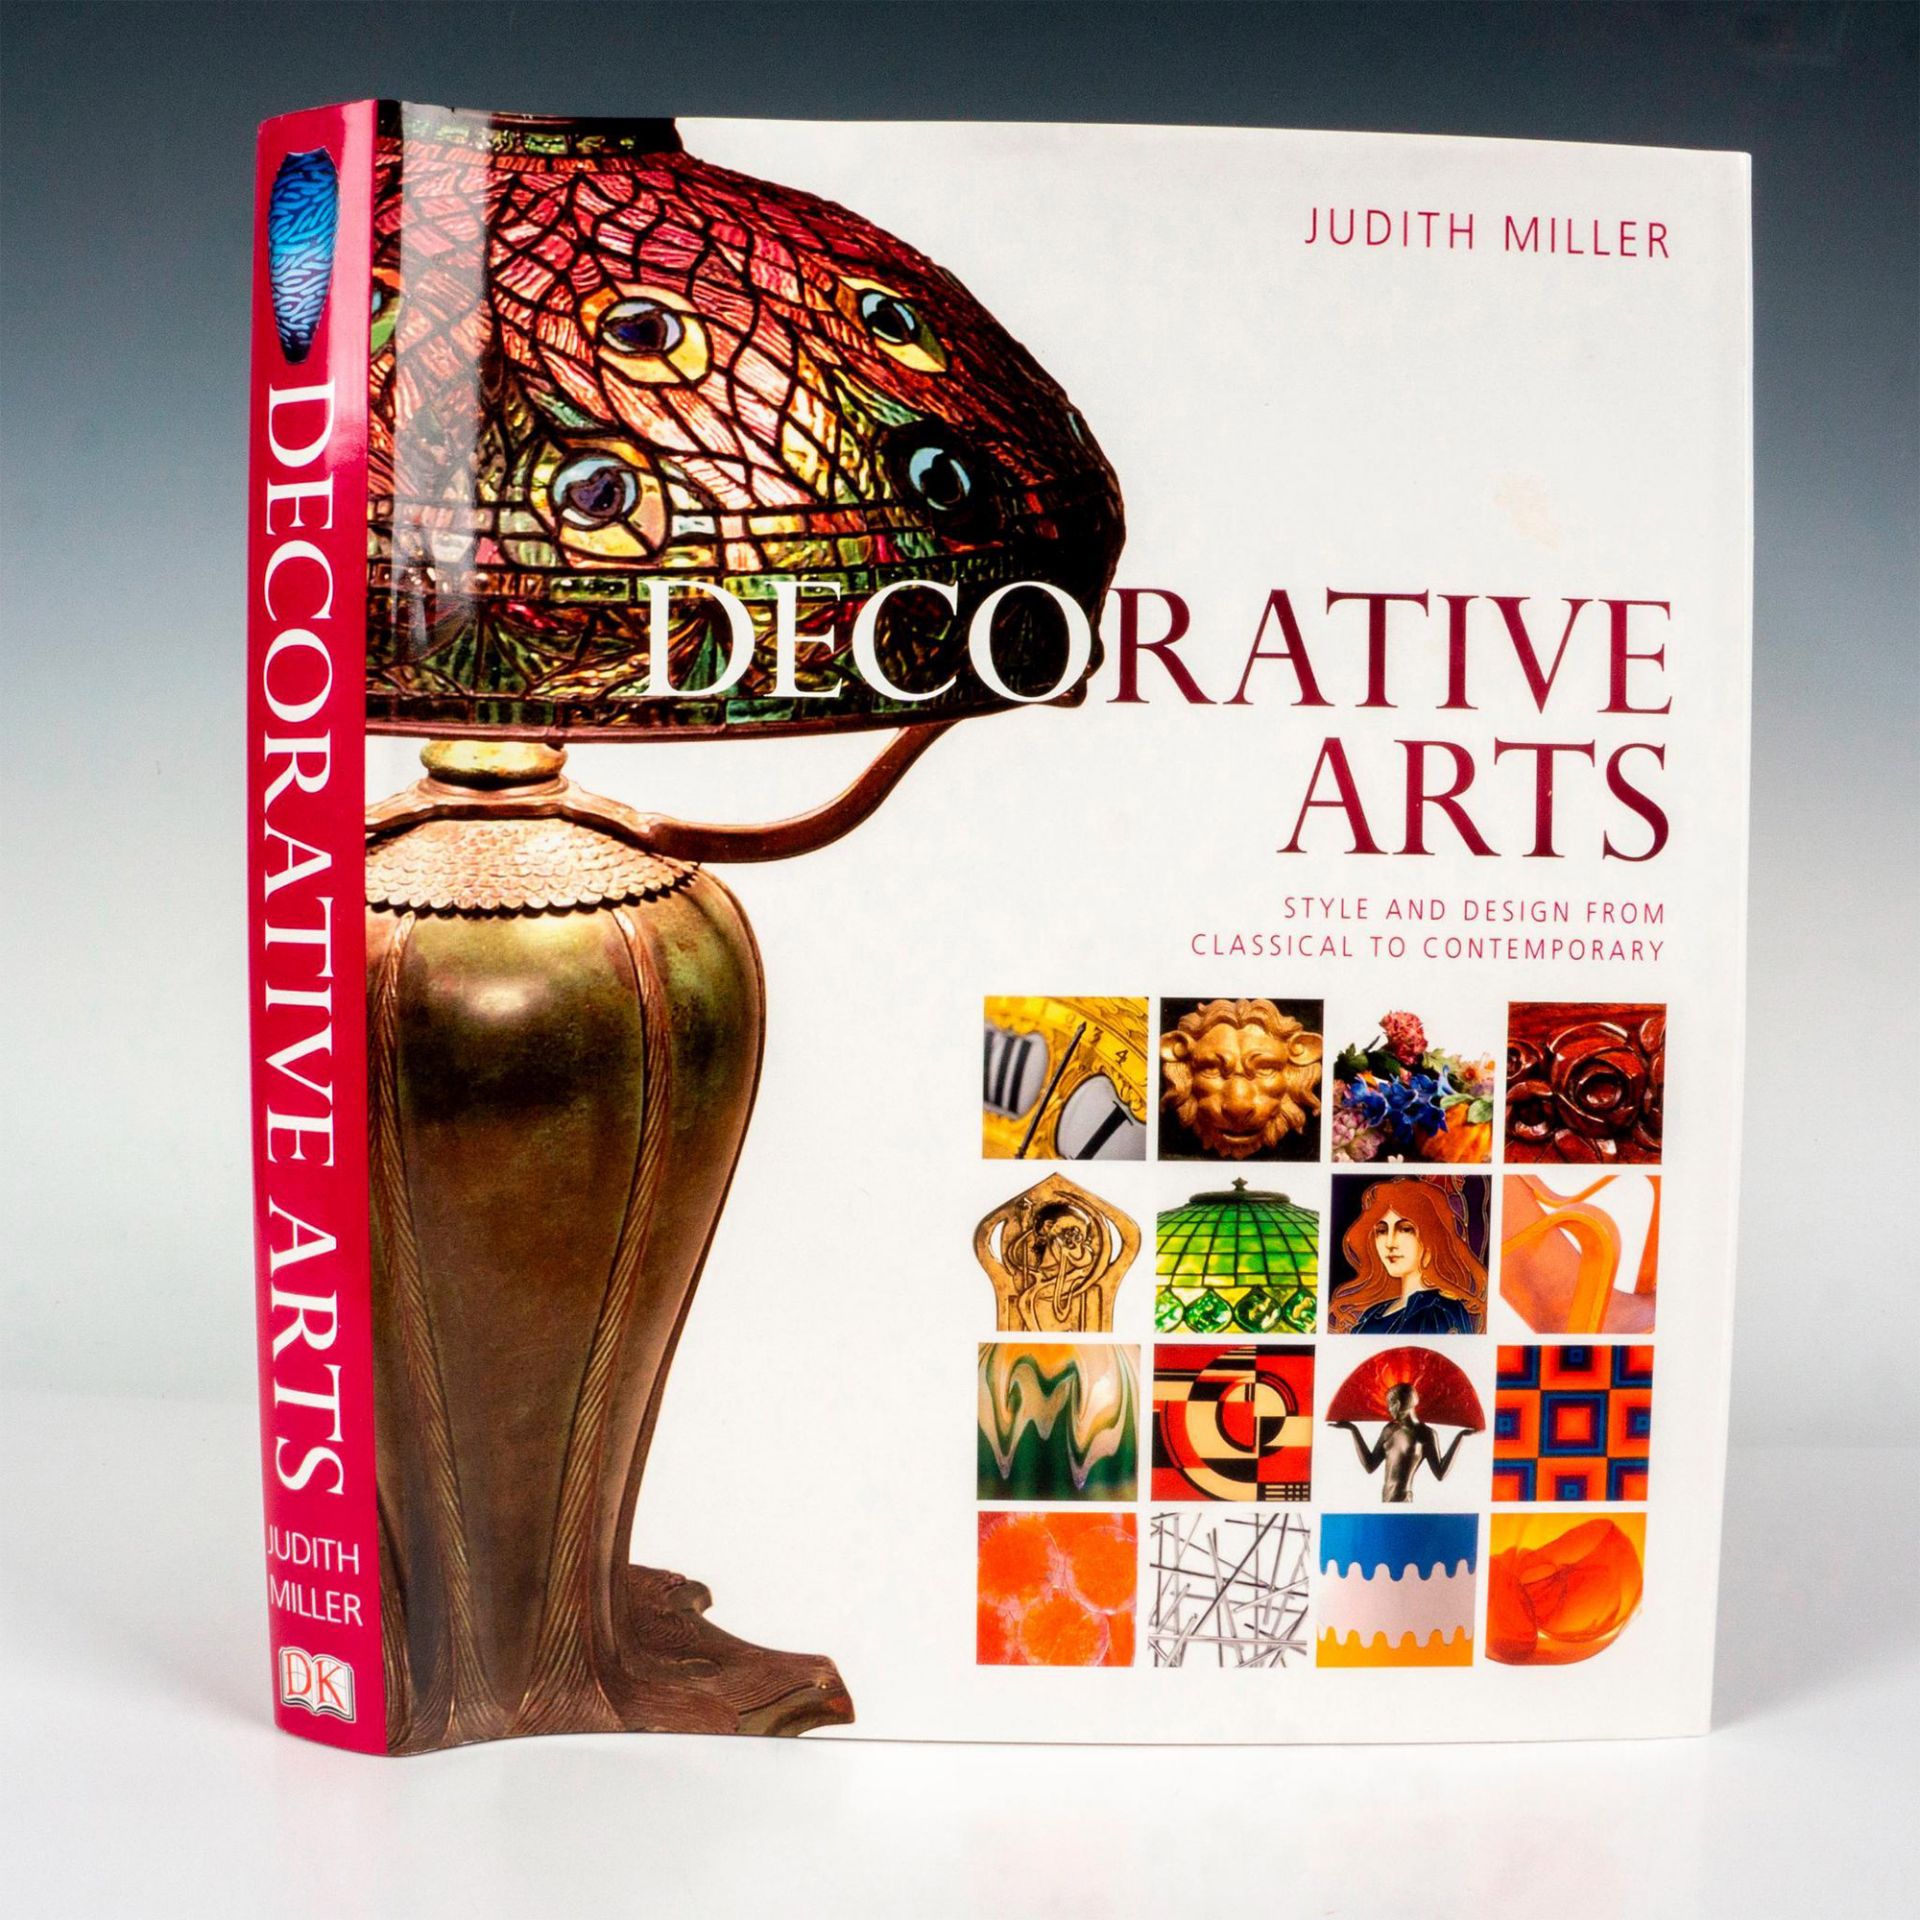 Decorative Arts, Book by Judith Miller